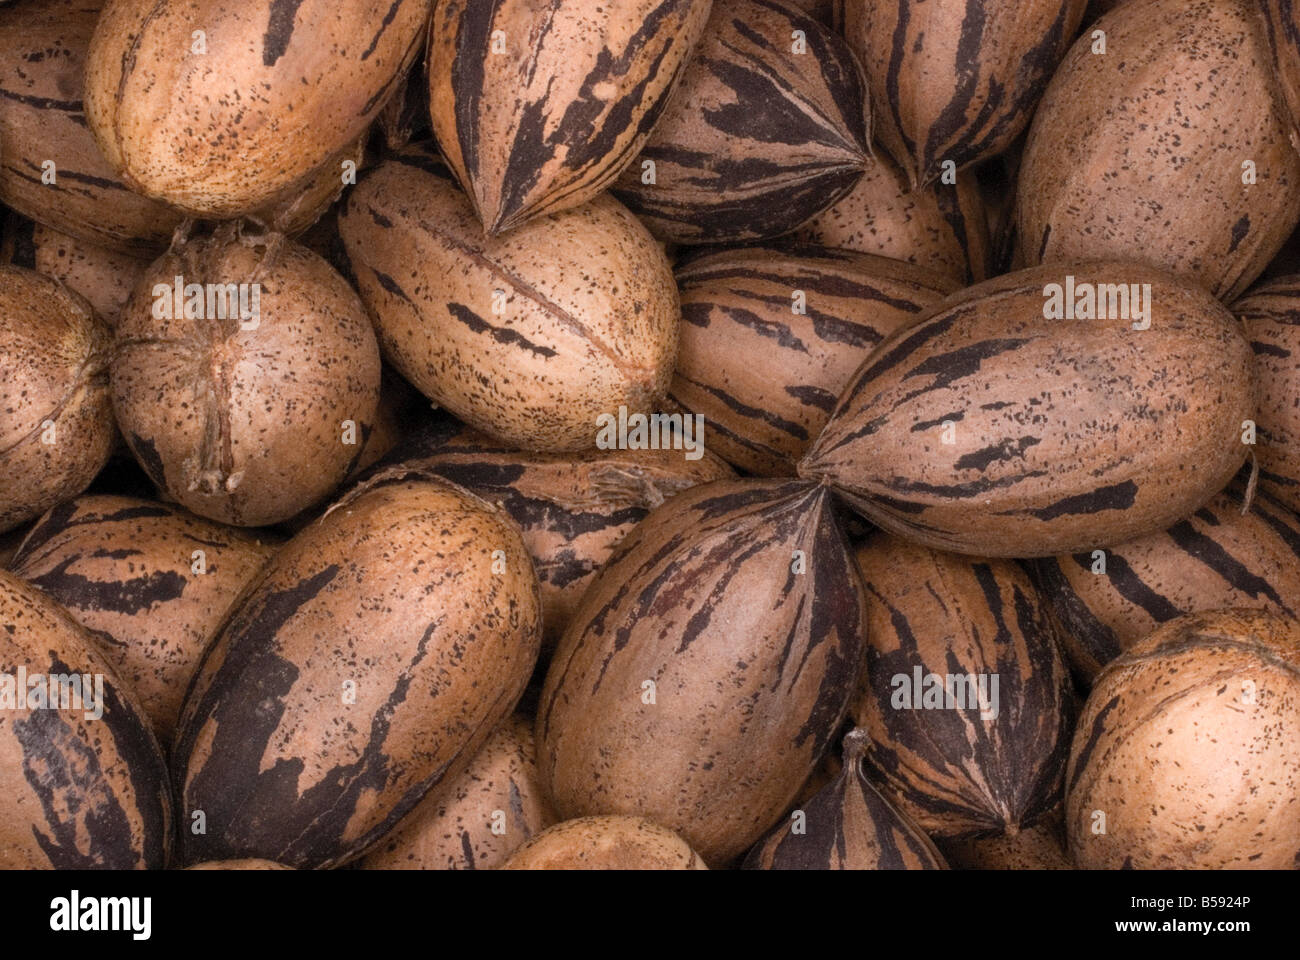 The pecan Carya illinoinensis or illinoensis is a species of hickory tree. Stock Photo